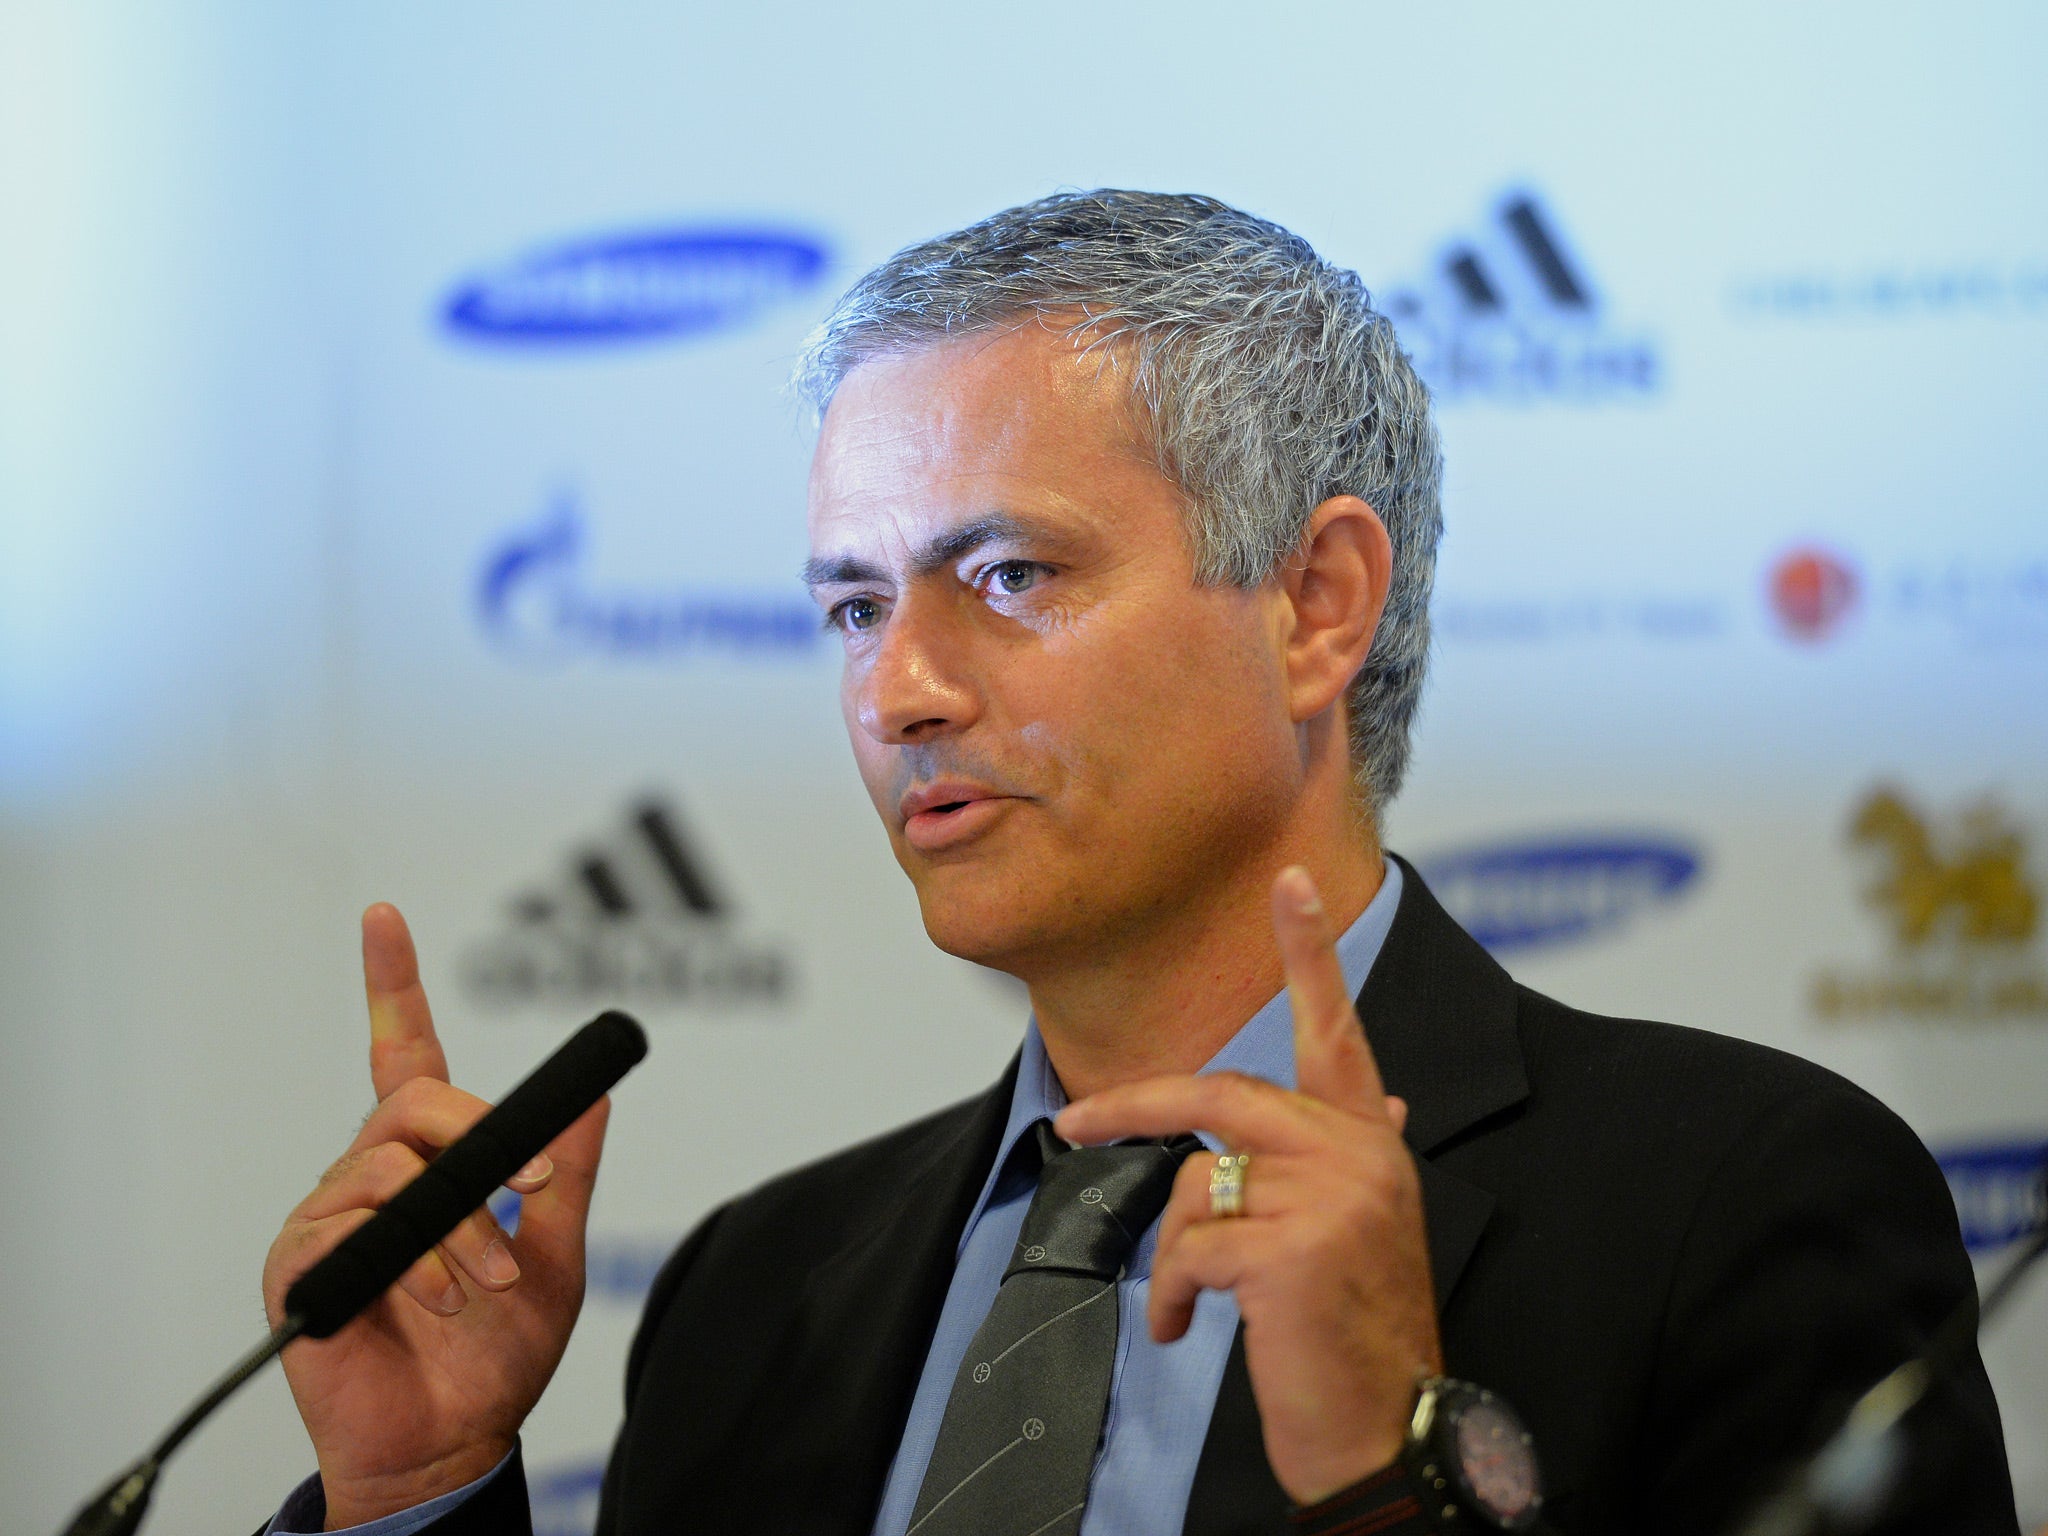 Jose Mourinho addresses the media at his first press conference since being reinstated as Chelsea manager